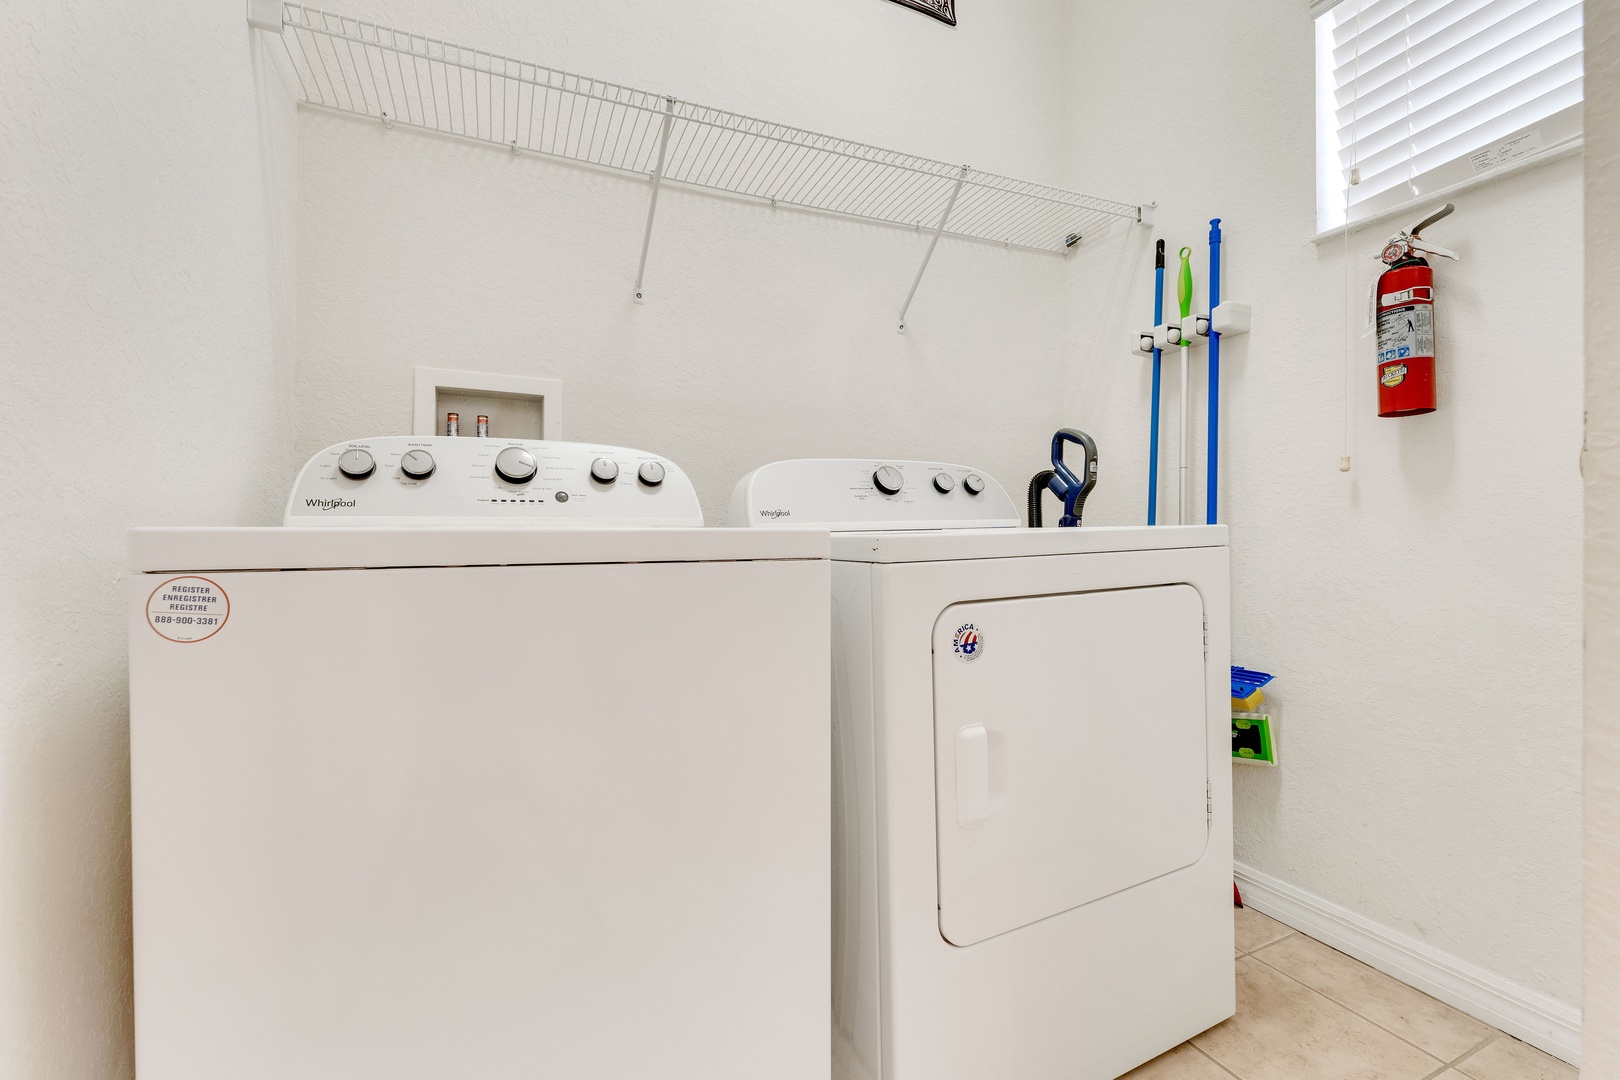 Private laundry is available for your stay, tucked away off the entryway